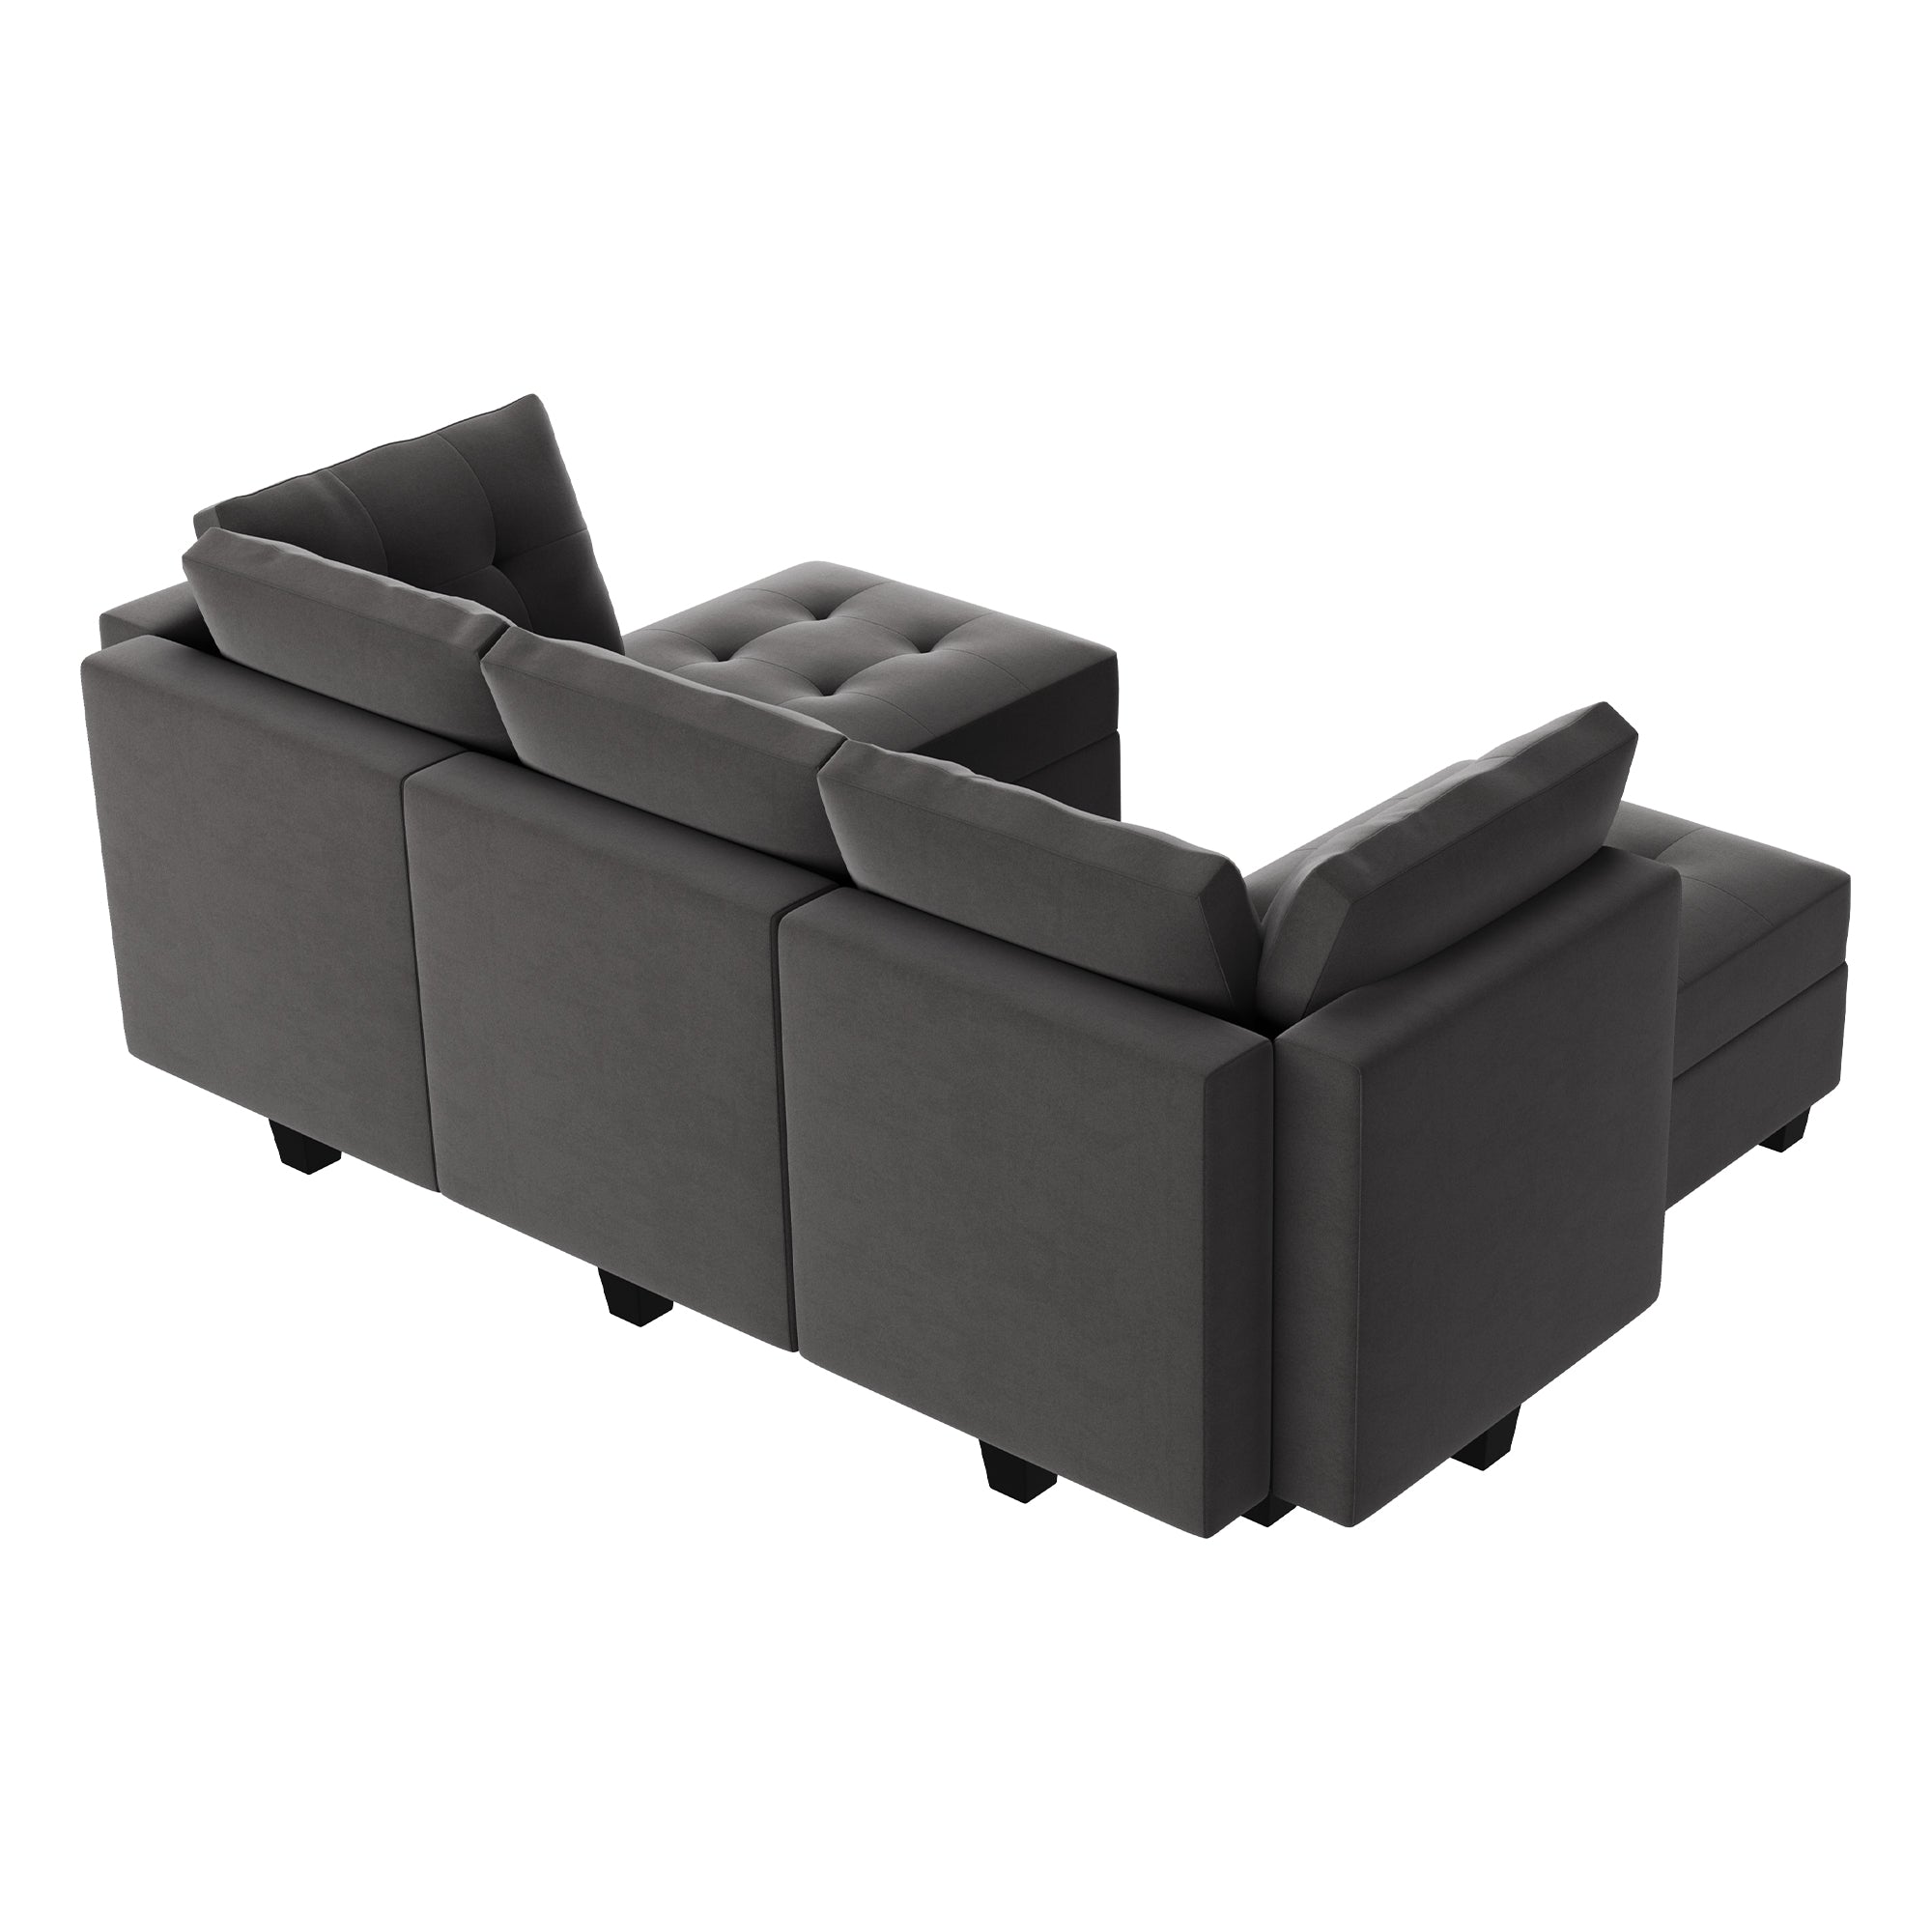 HONBAY 5-Piece Velvet Modular Sectional With Storage Seat